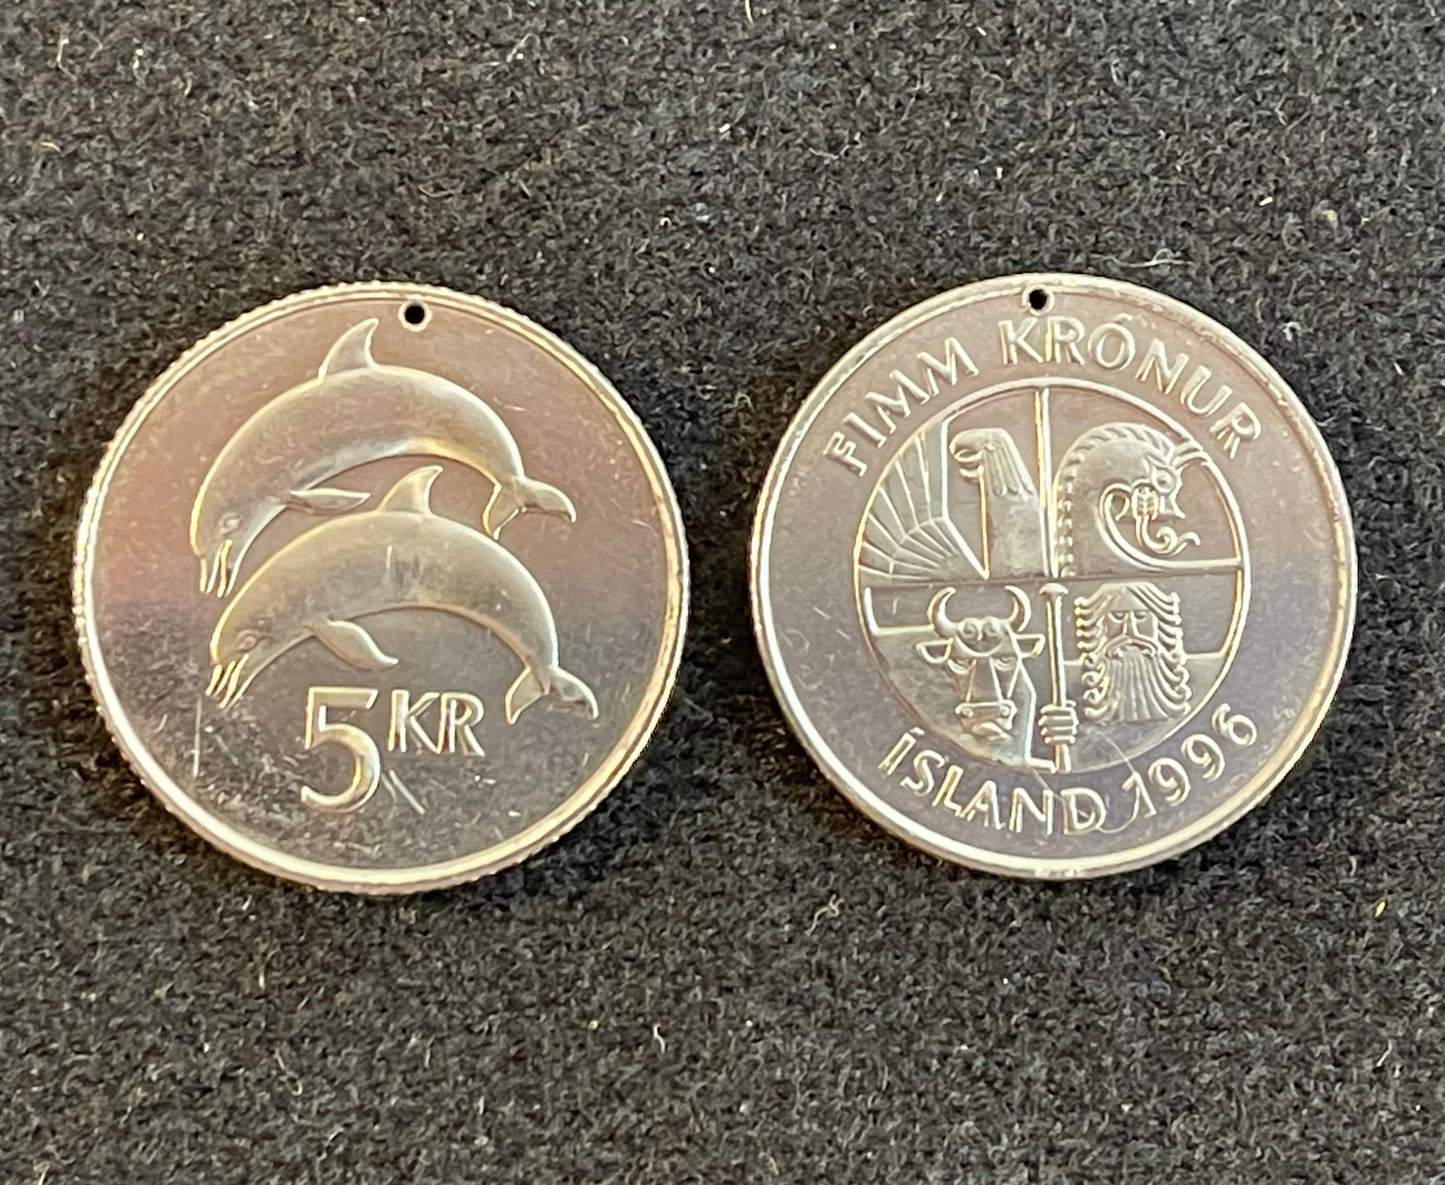 Two Dolphins 5 Kronur Iceland Authentic Coin Money for Jewelry and Craft Making